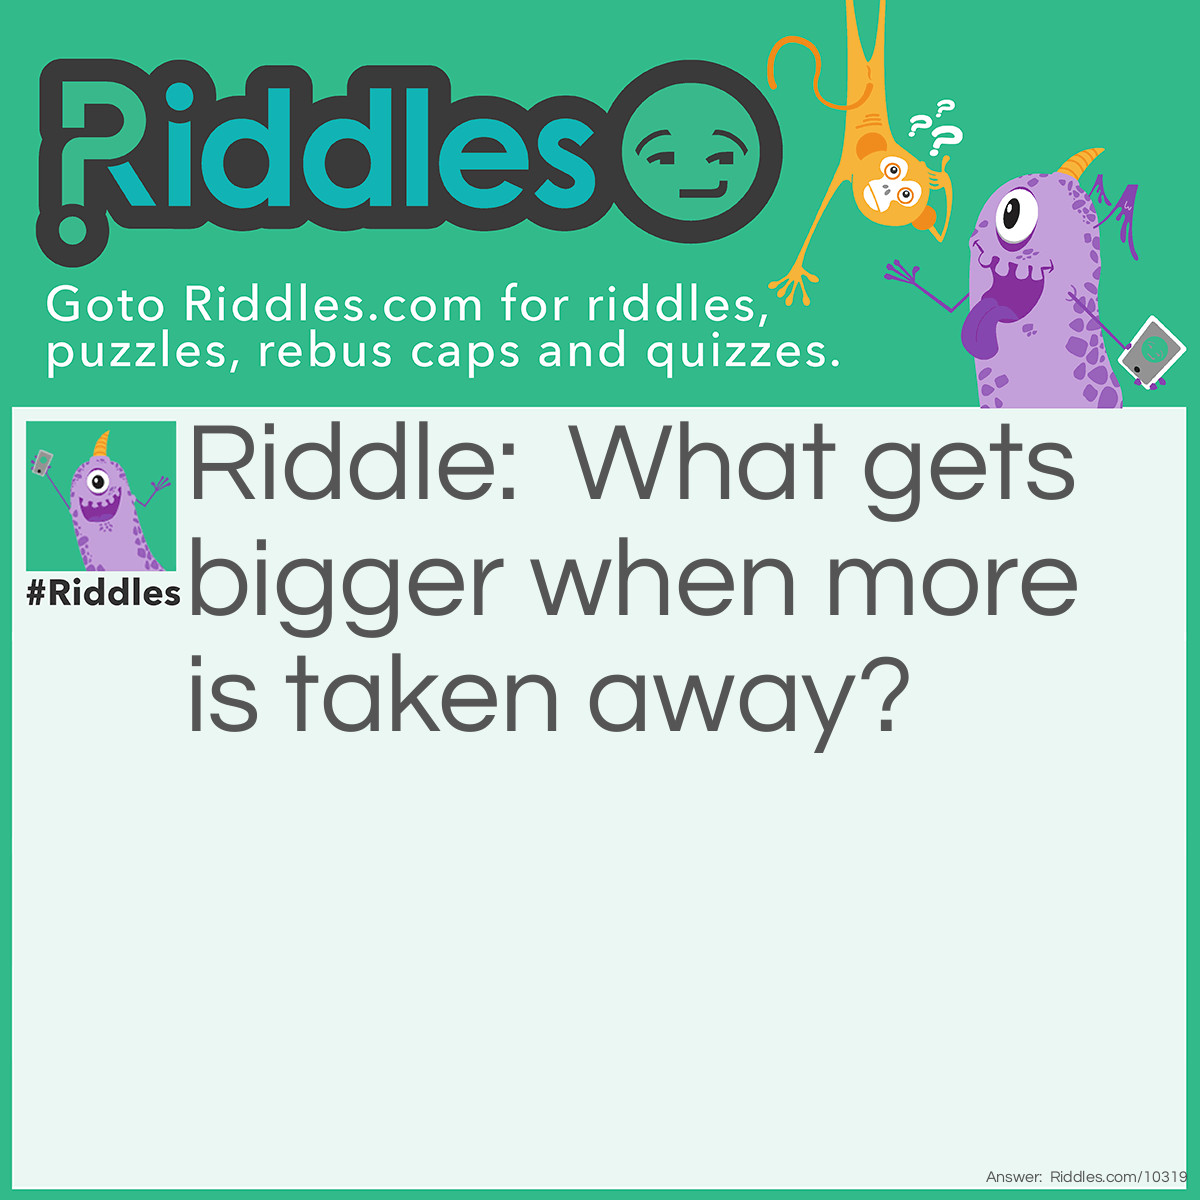 Riddle: What gets bigger when more is taken away? Answer: A whole.